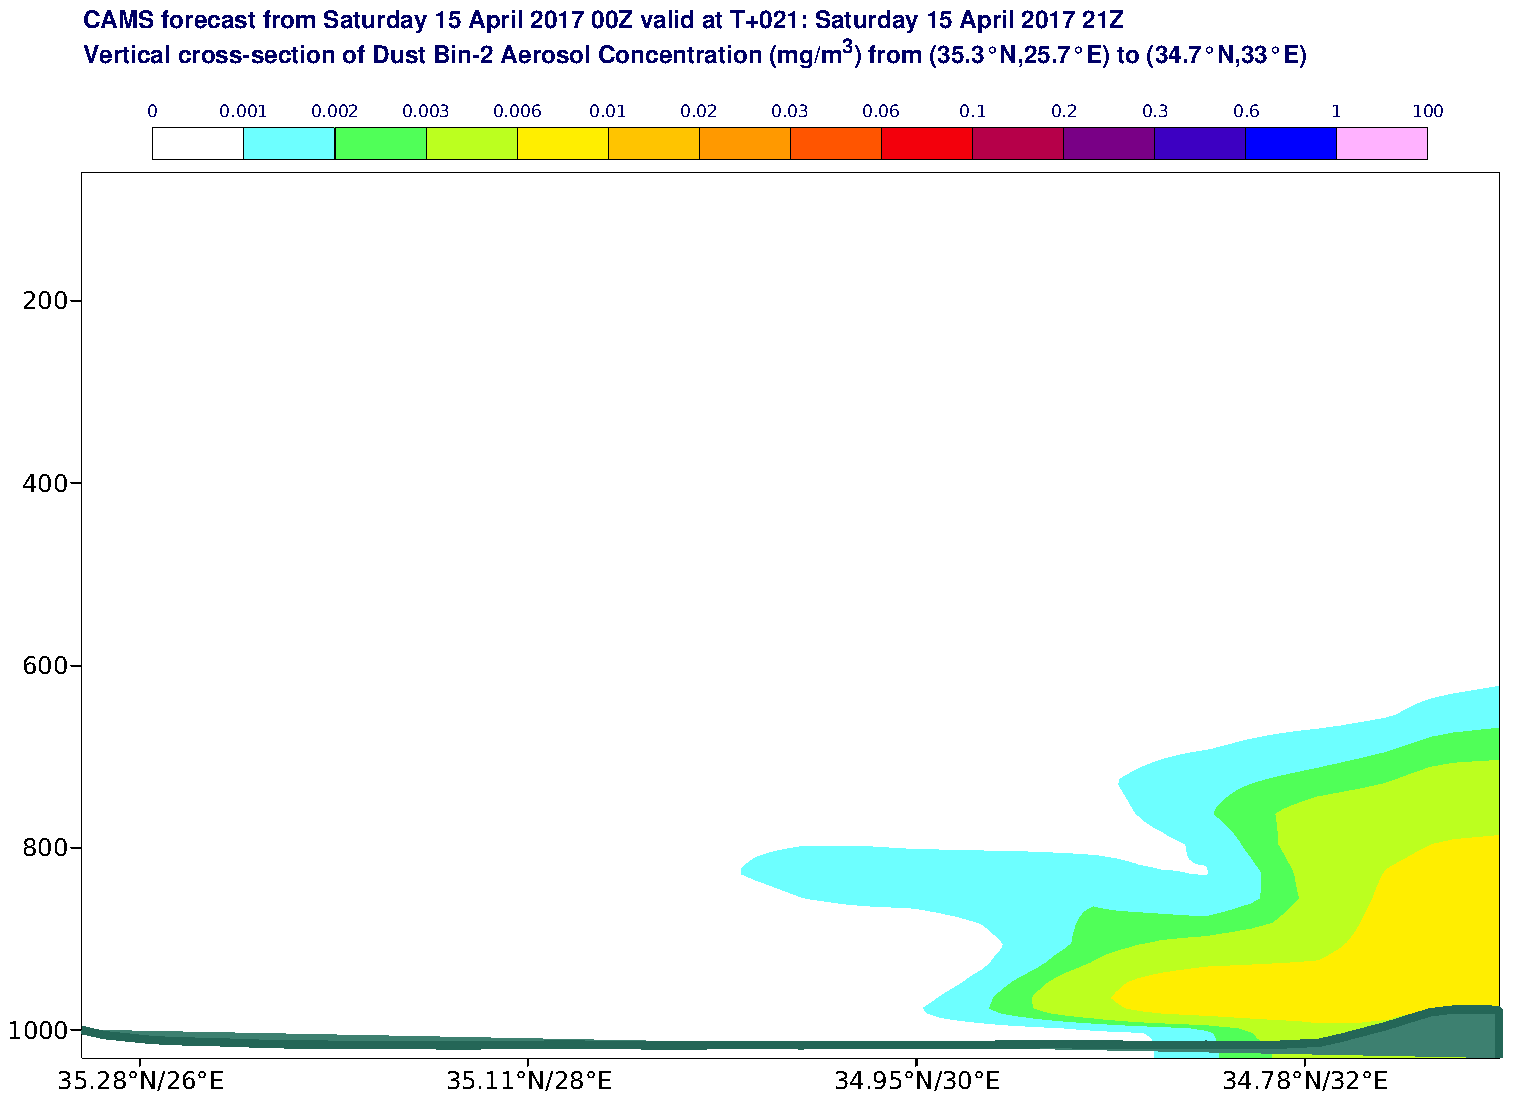 Vertical cross-section of Dust Bin-2 Aerosol Concentration (mg/m3) valid at T21 - 2017-04-15 21:00